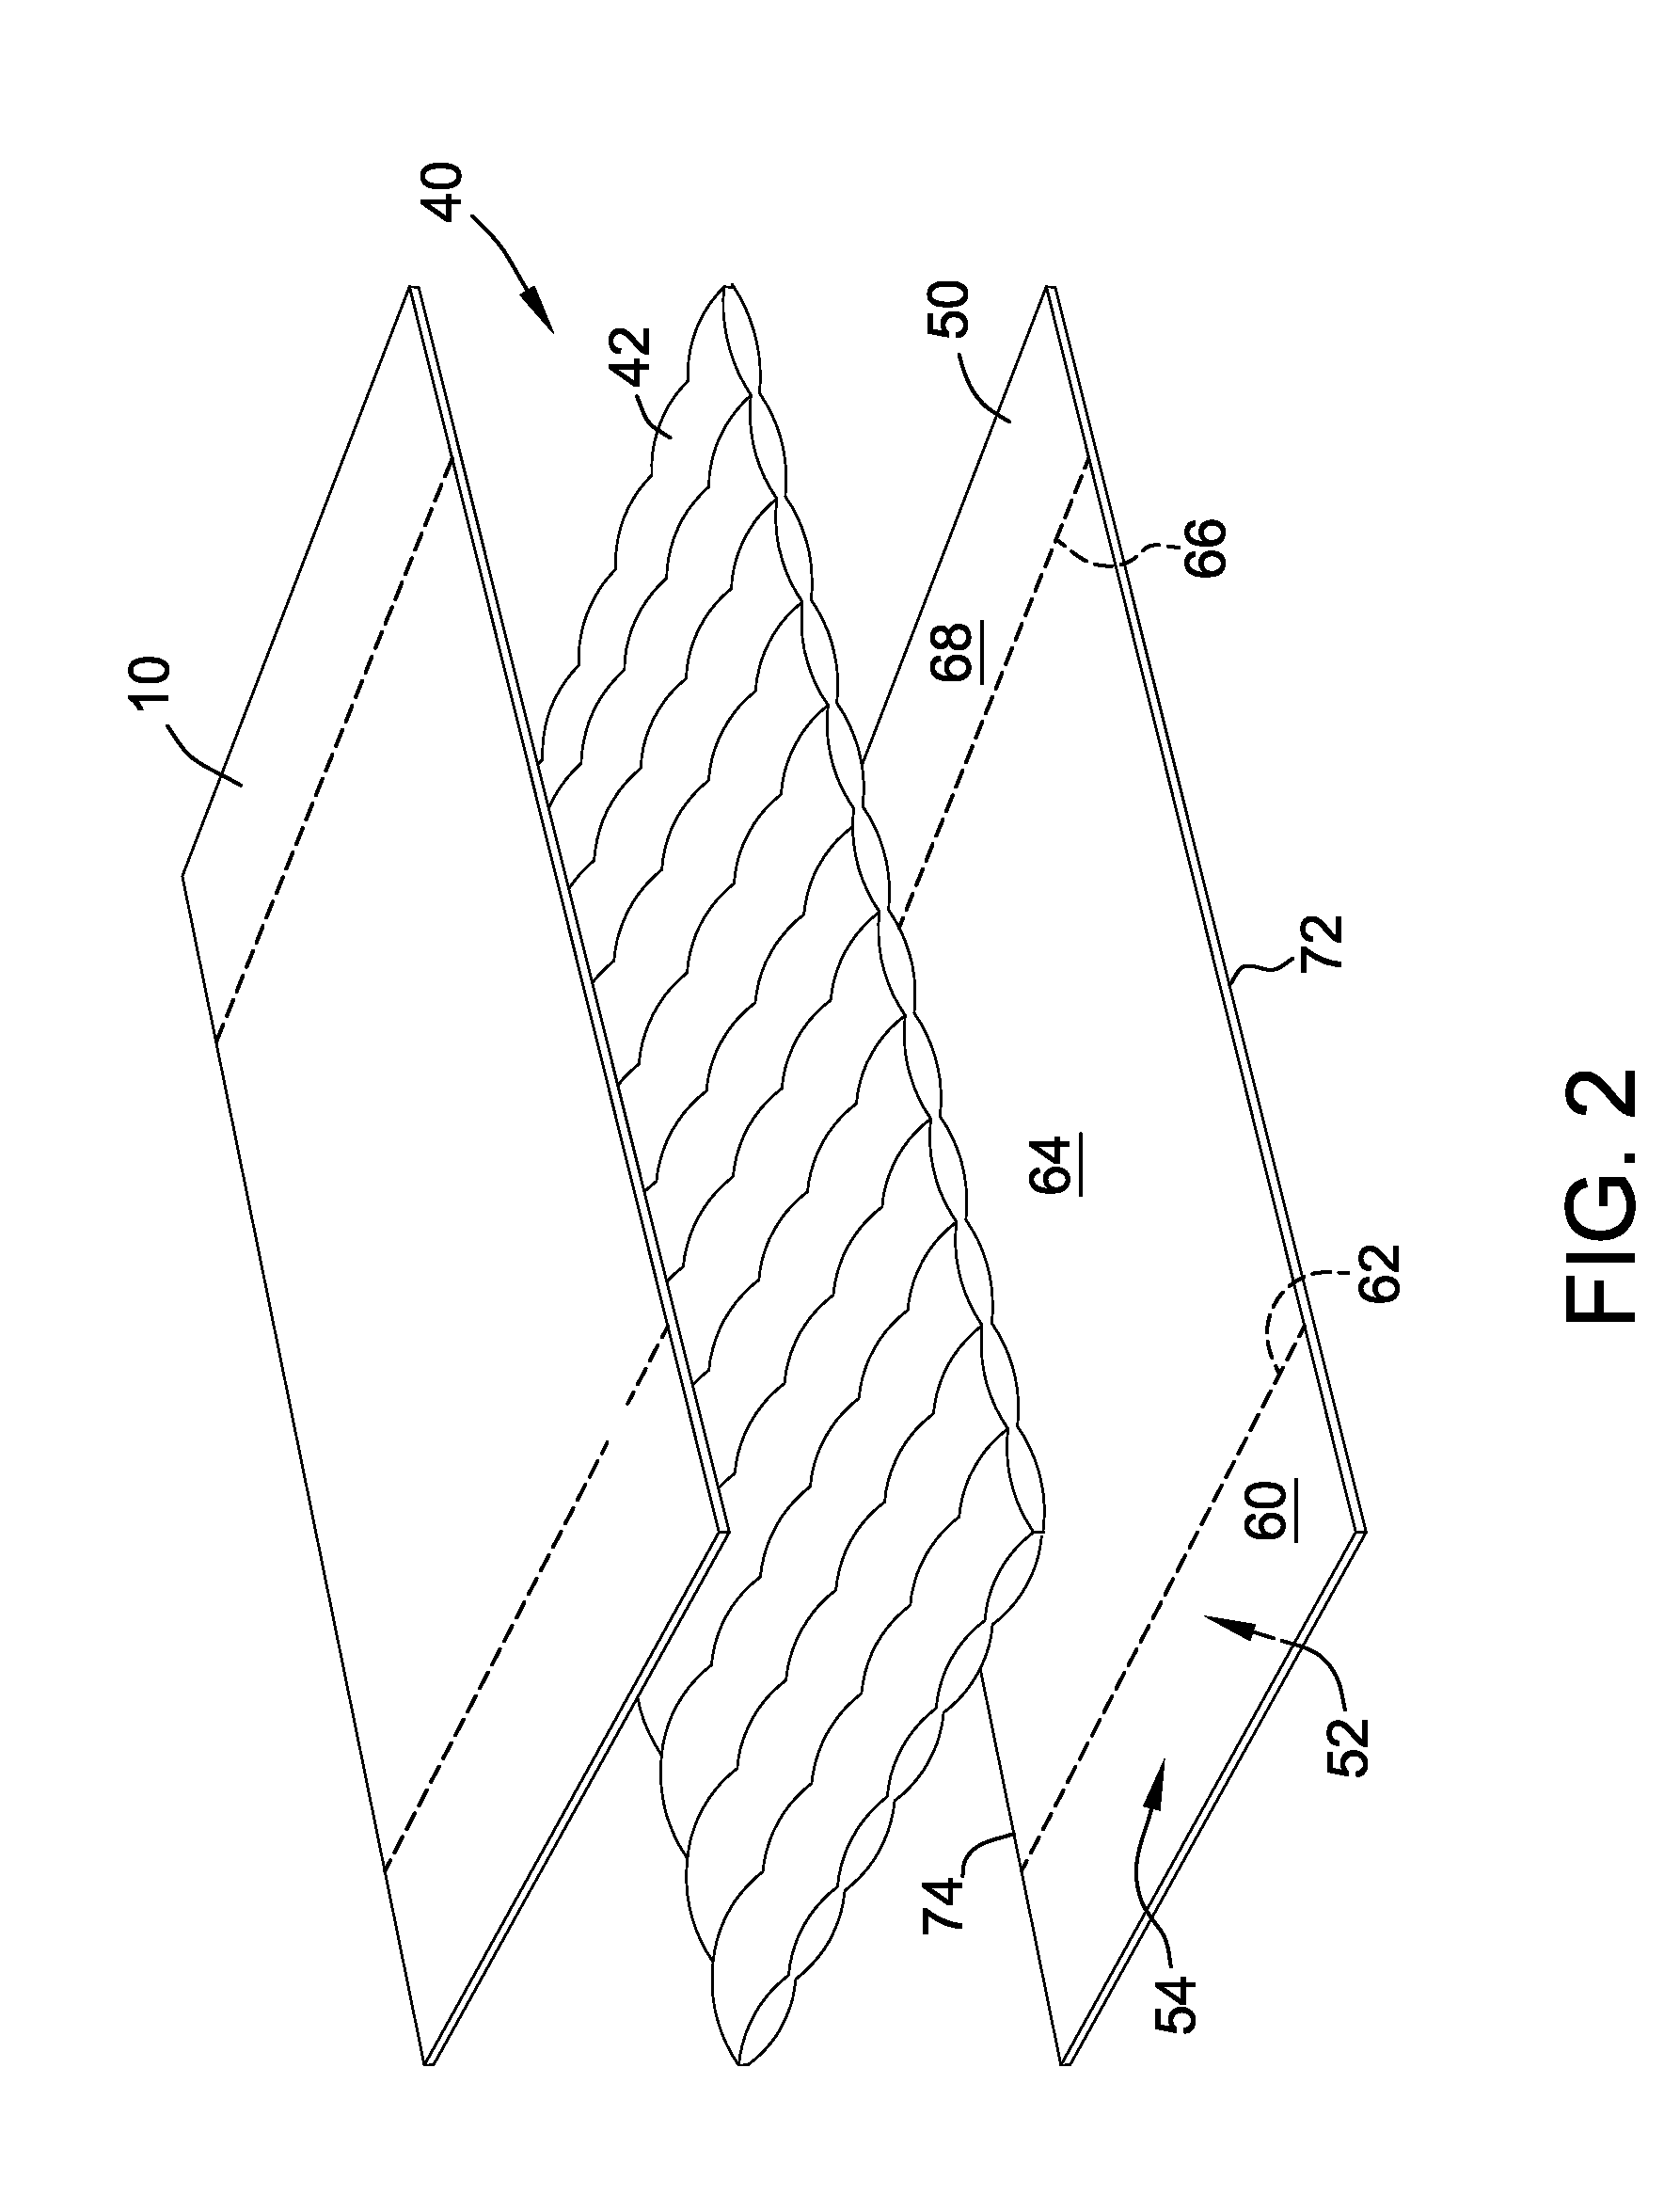 Memory quilt and method of assembling same